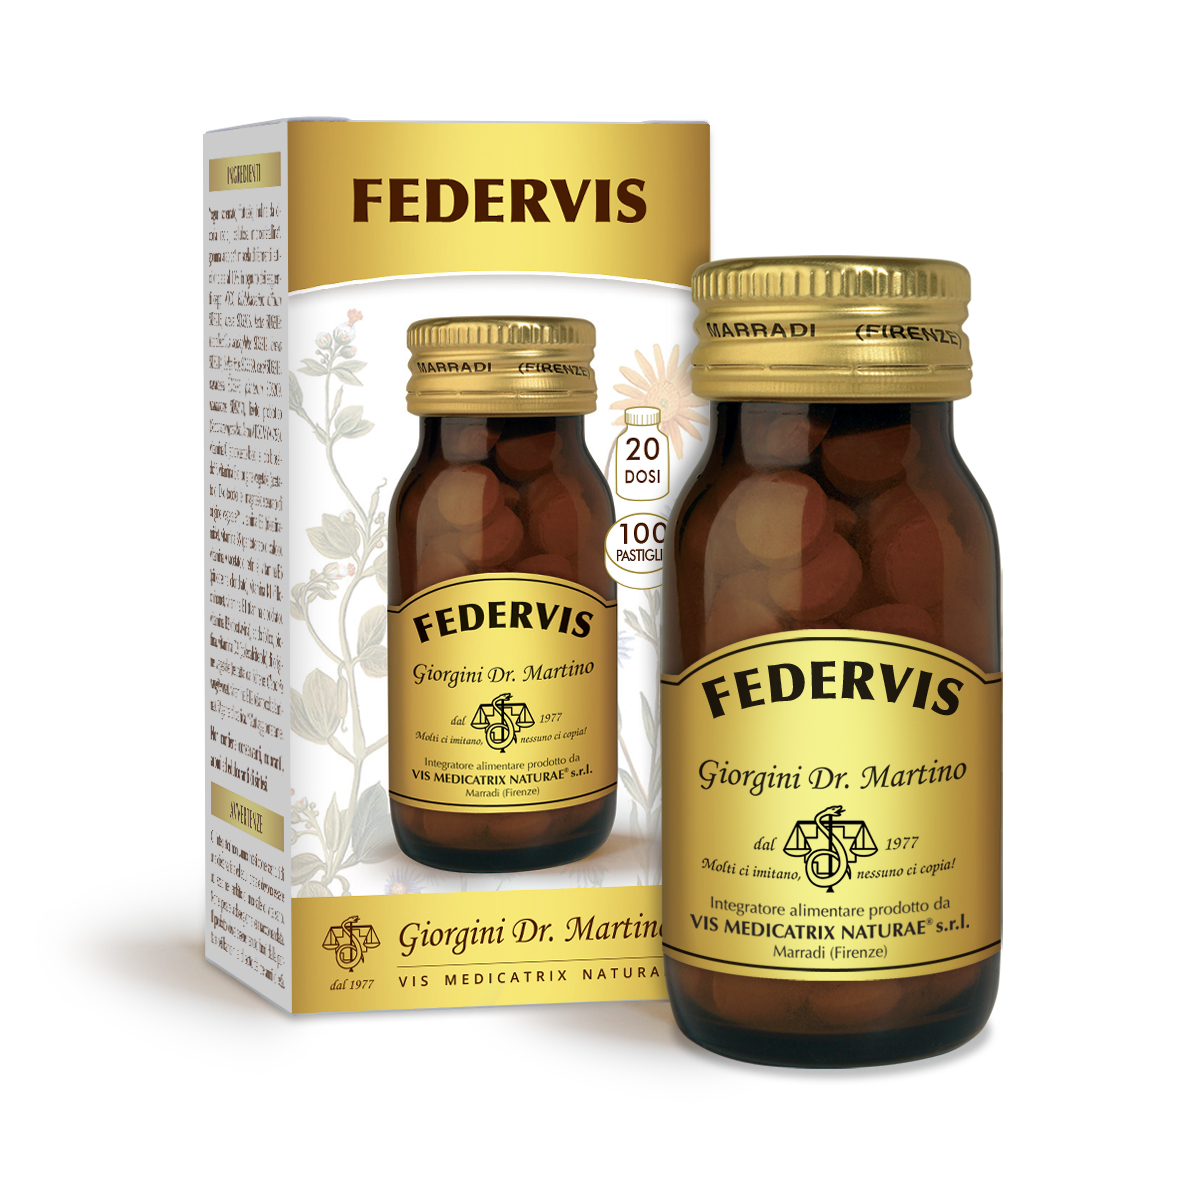 FEDERVIS